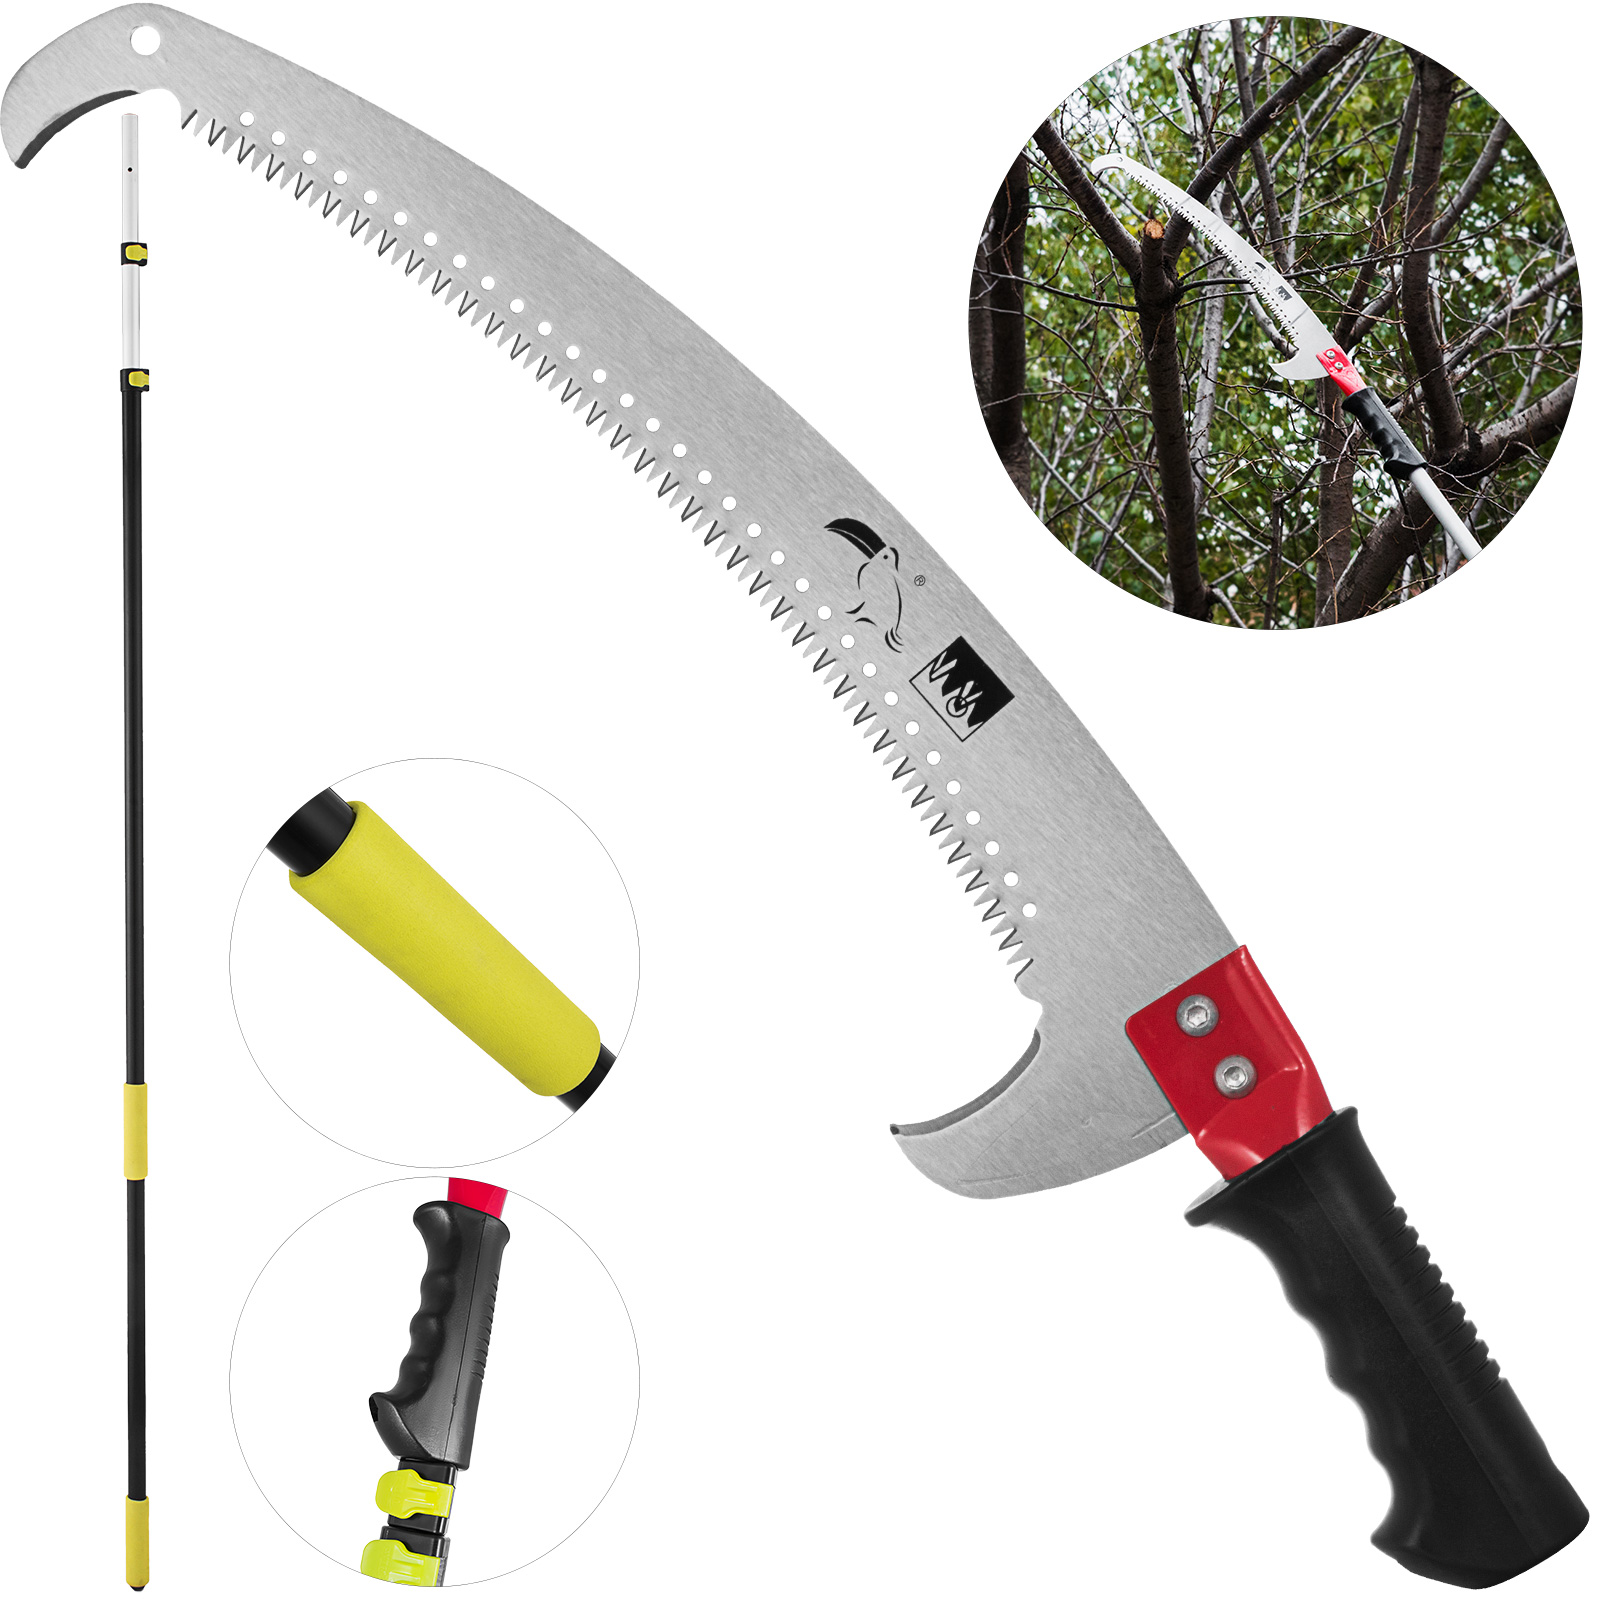 4-13.8ft Tree Pruner Pole Saw Telescopic Pole Saw 23in Curved Saw Blade Forestry от Vevor Many GEOs